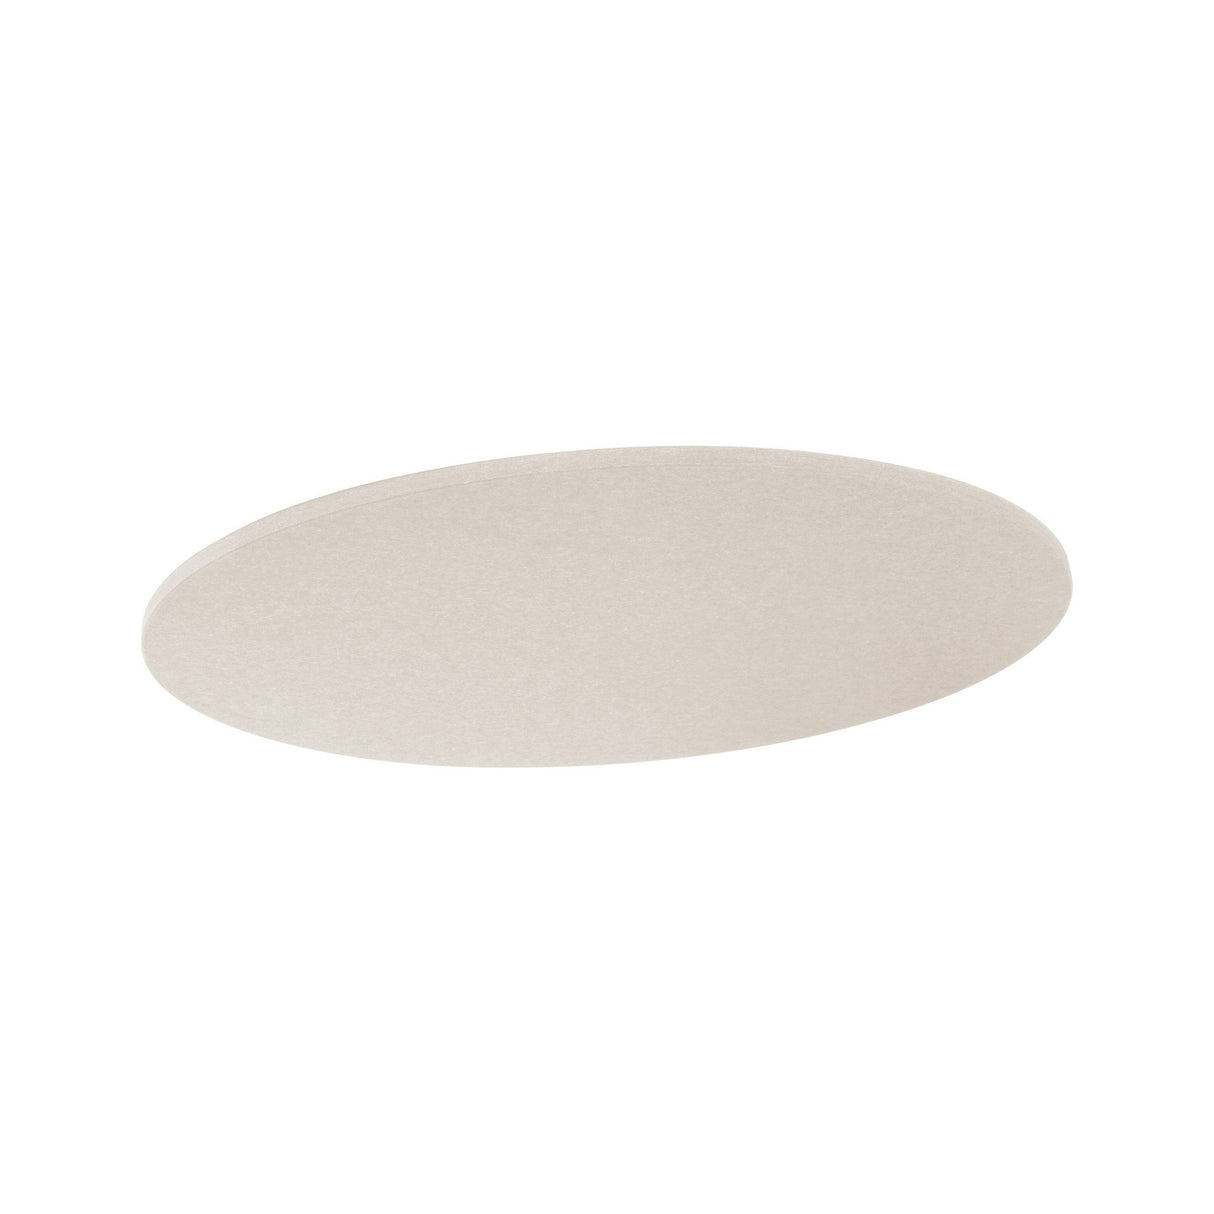 Primacoustic EcoScapes Round Cloud 4-Foot Micro-Beveled Edge Wall Panel, Ivory 2-Pack